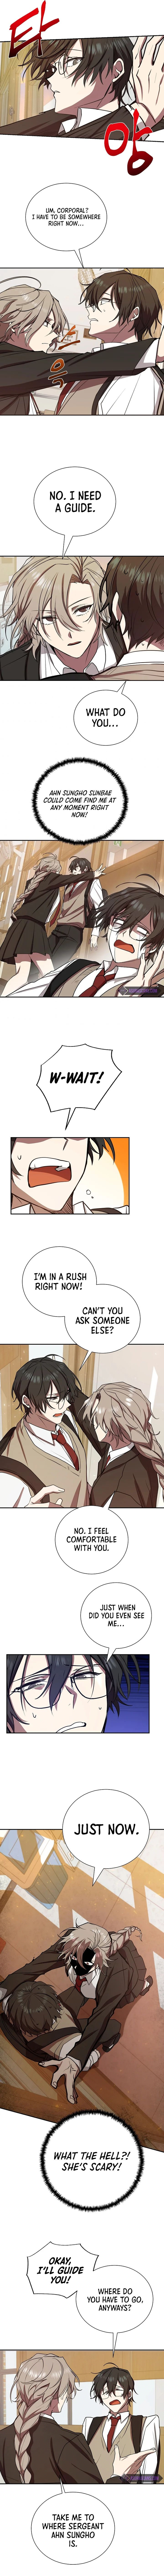 My School Life Pretending To Be a Worthless Person - Chapter 8 Page 5